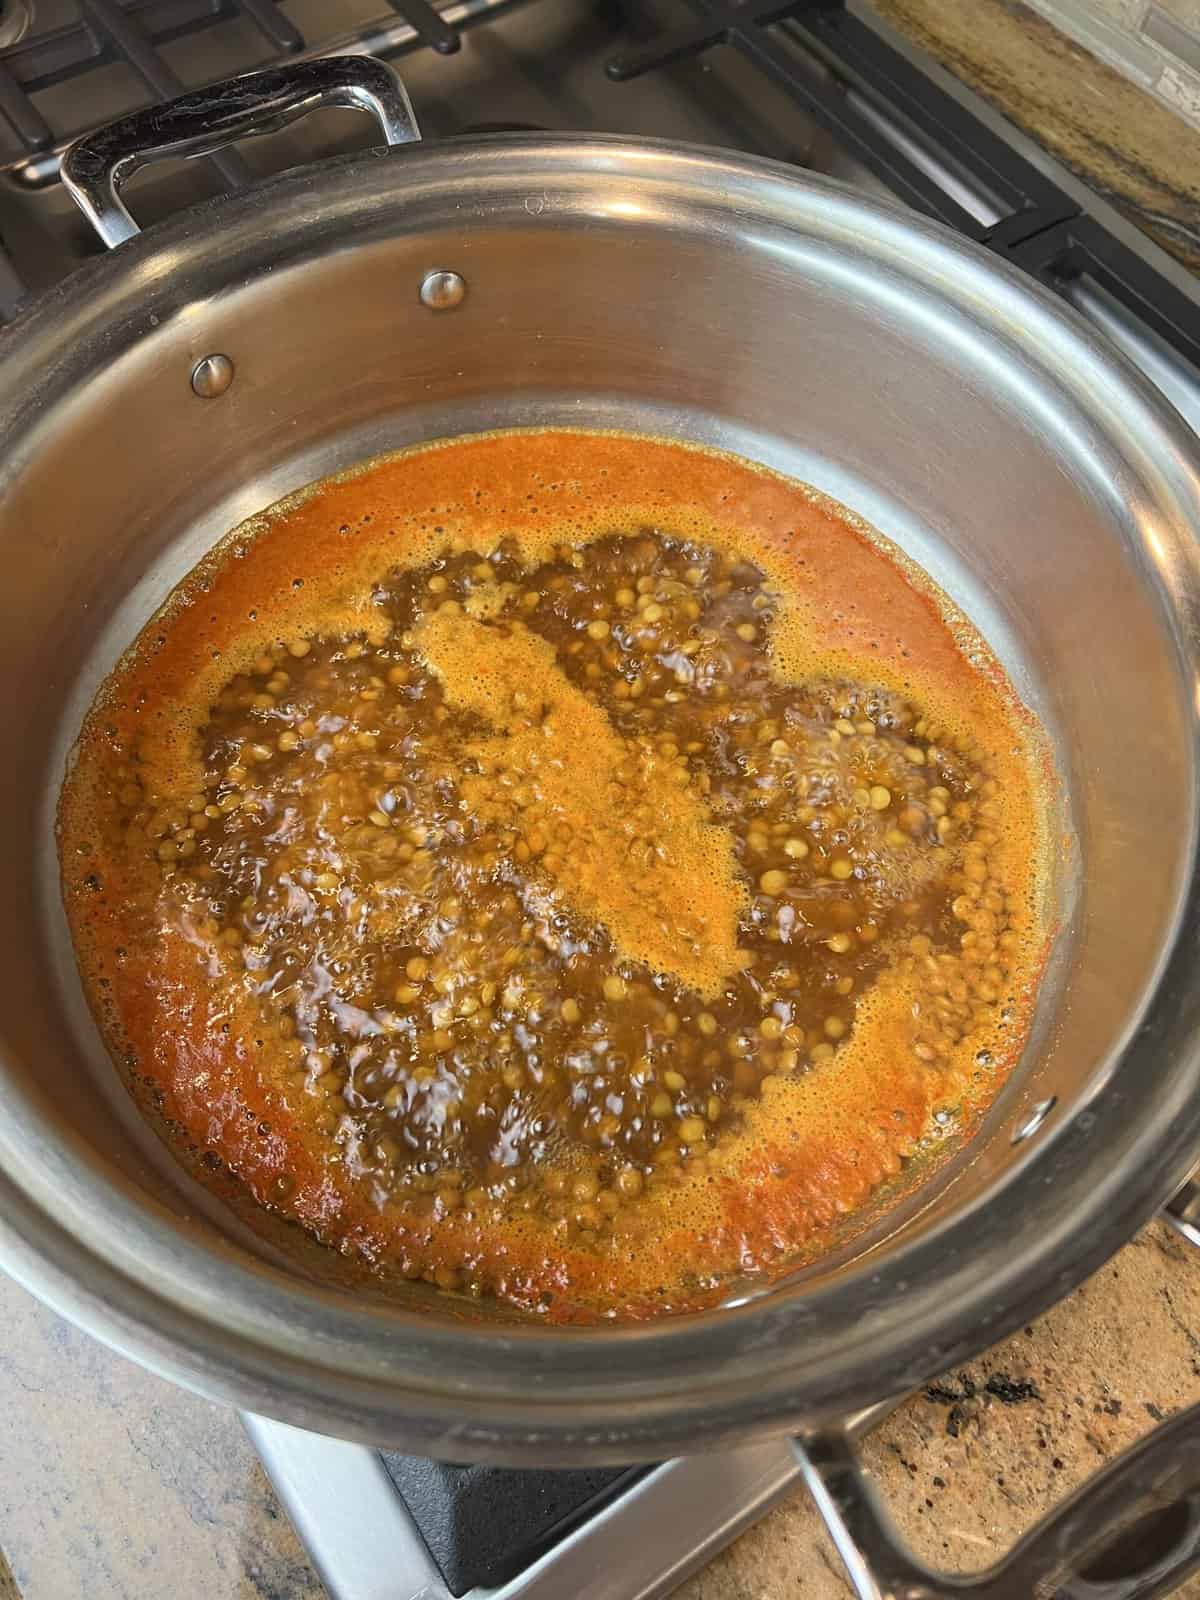 A stainless steel cooking pot filled with brown lentils, water and the mix of spices reaching a boil.